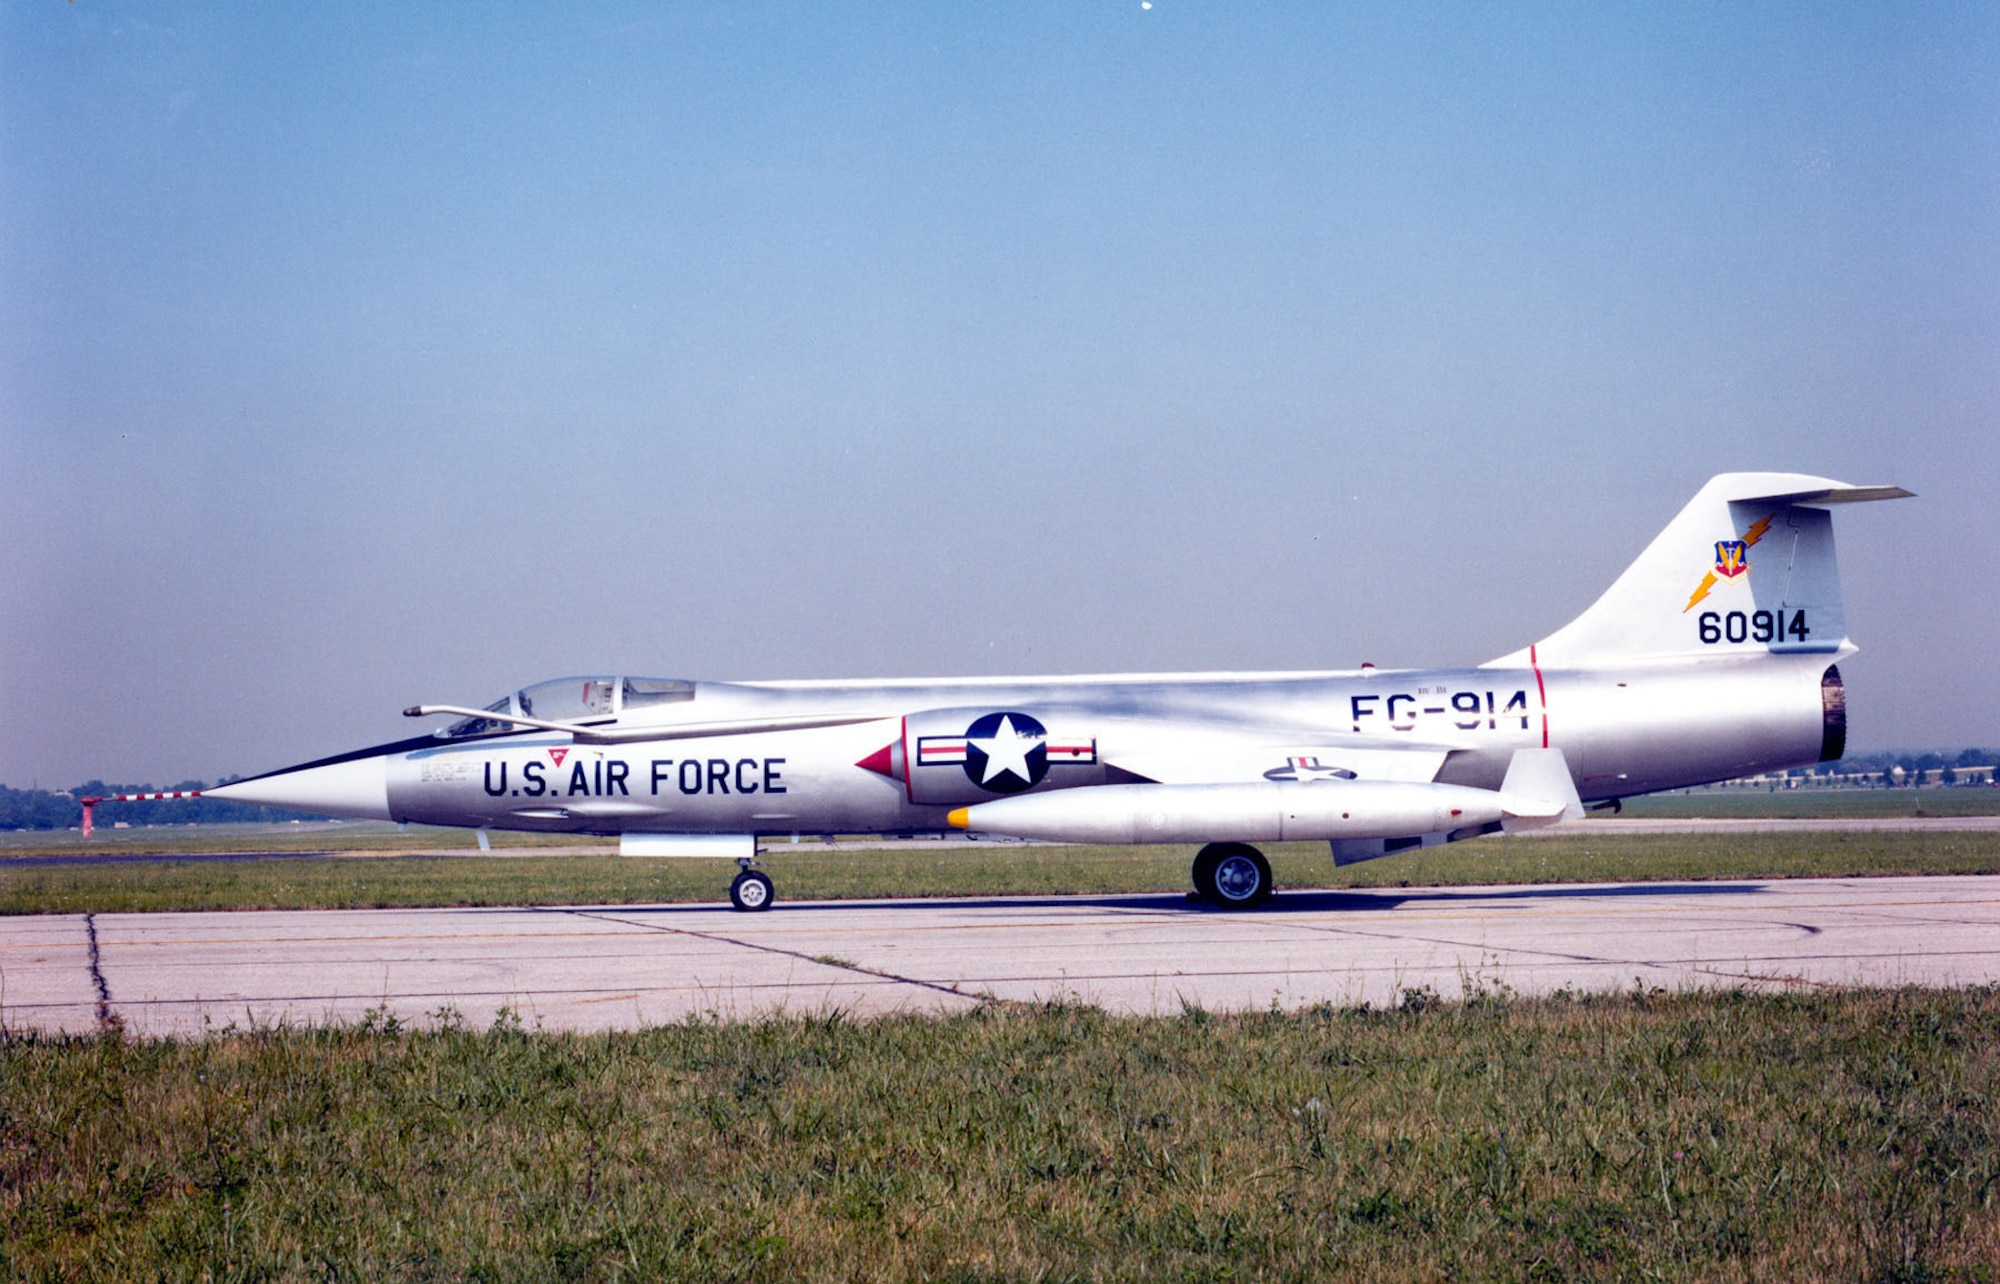 DAYTON, Ohio -- Lockheed F-104C Starfighter at the National Museum of the United States Air Force. (U.S. Air Force photo)